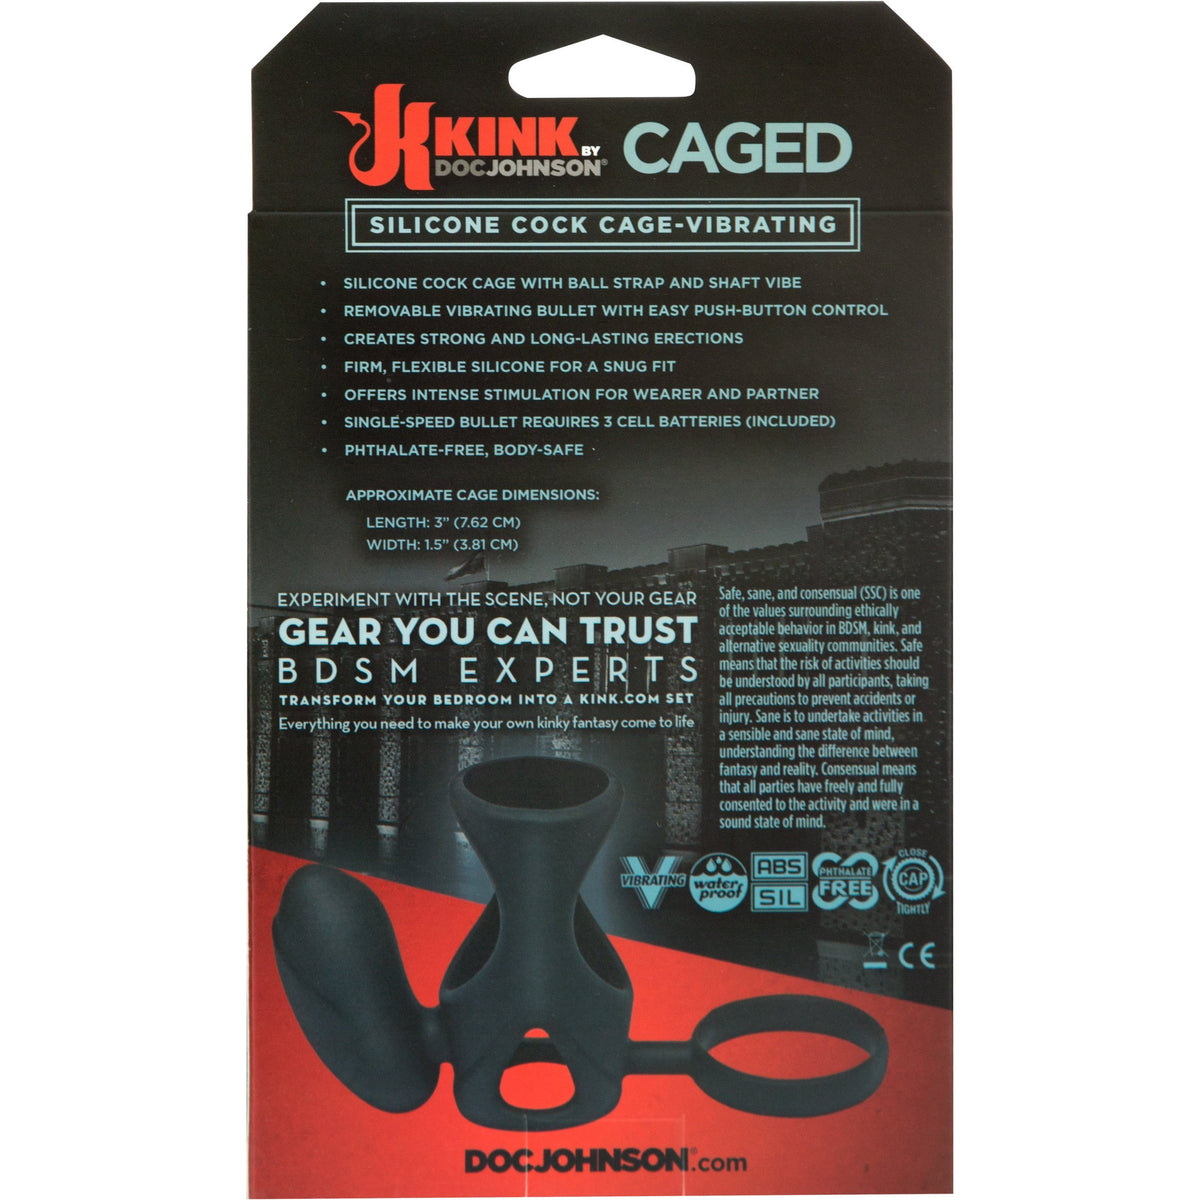 Doc Johnson Kink - Caged Vibrating Silicone Cock Cage